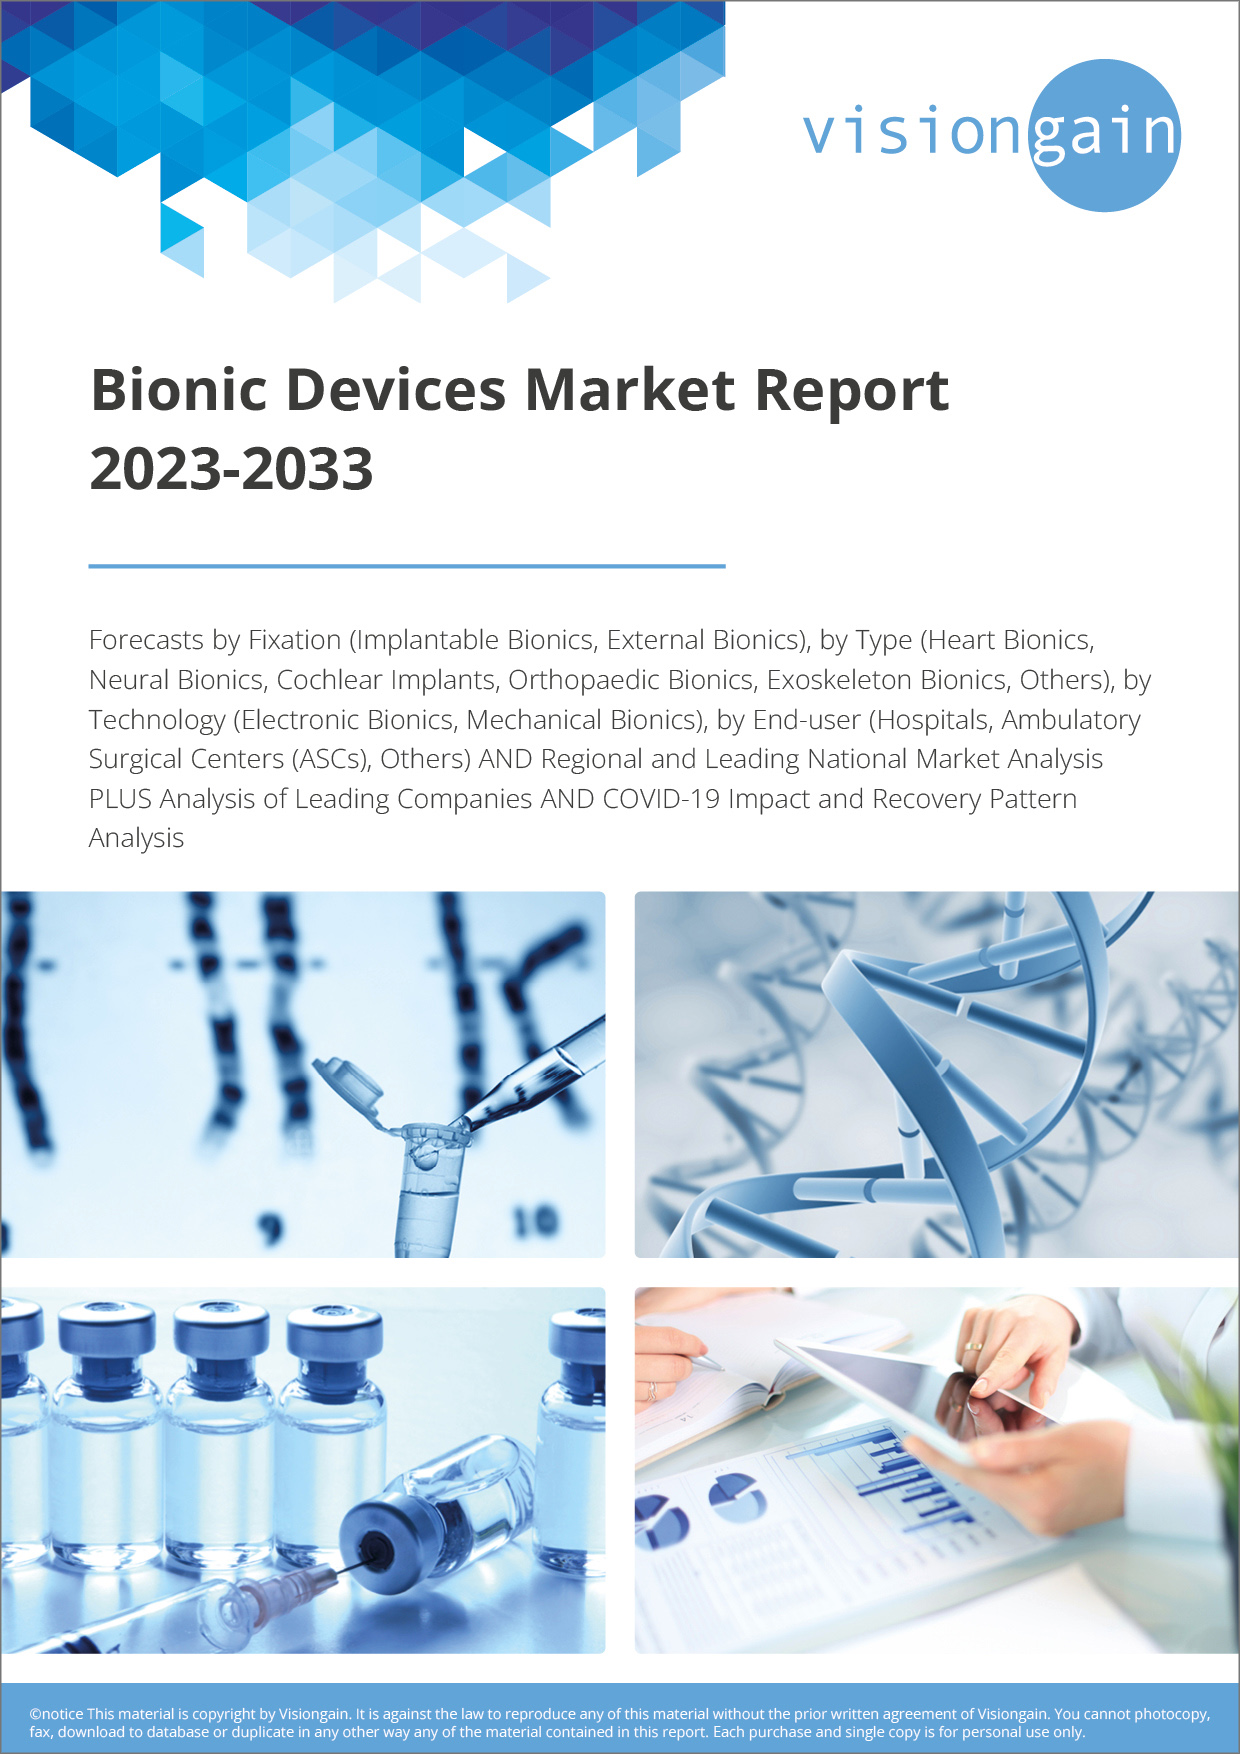 Bionic Devices Market Report 2023-2033